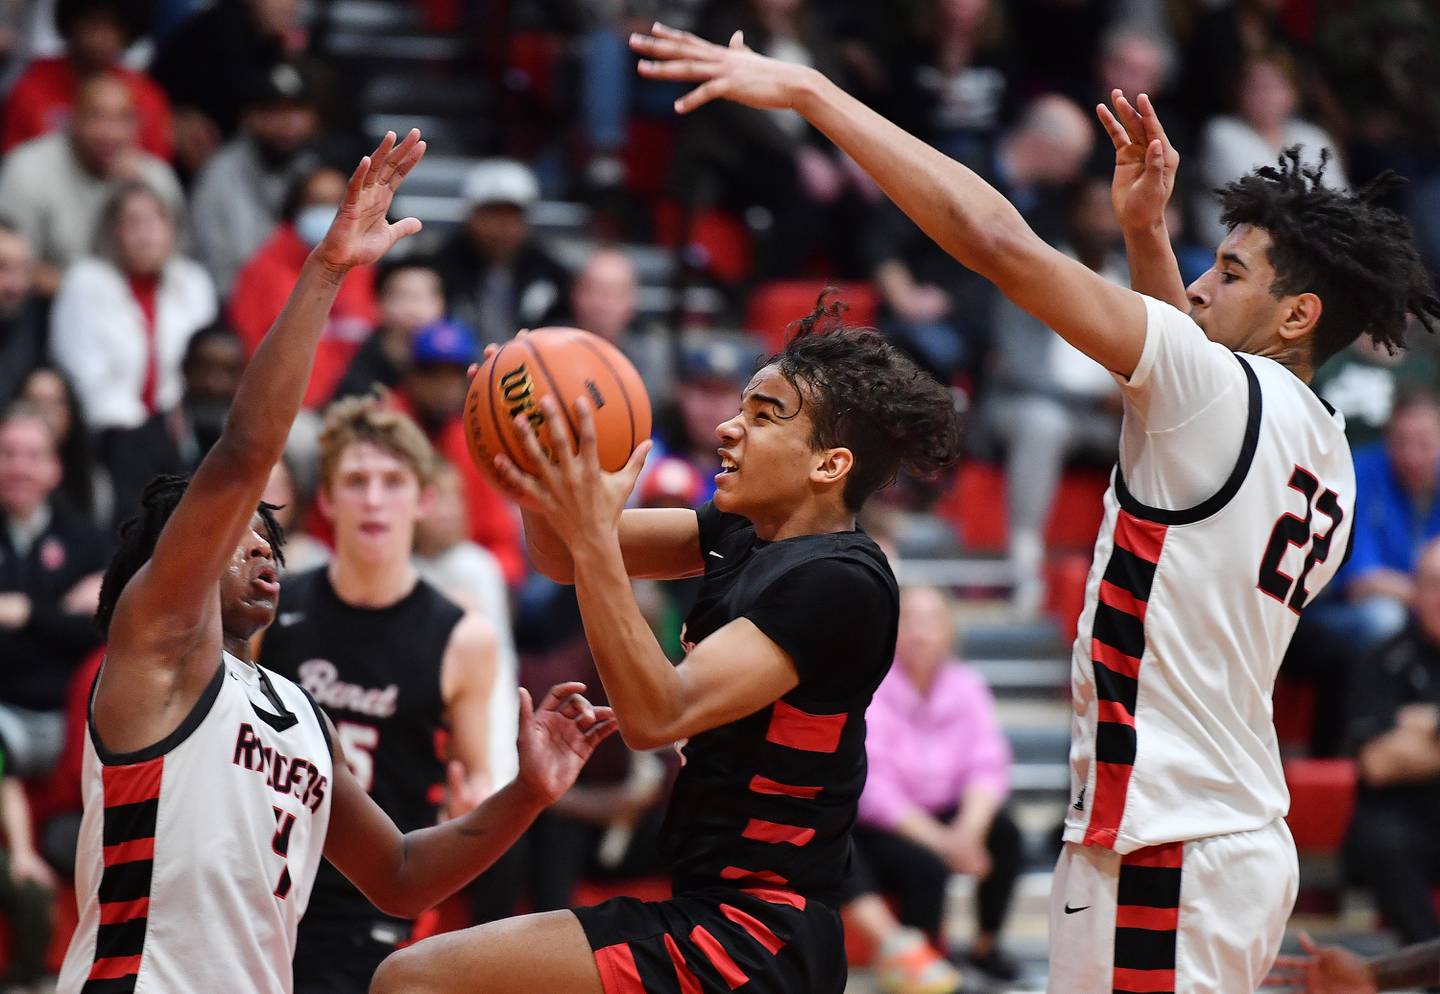 Benet's Blake Fagbemi goes to the basket between Bolingbrook's Kevin Cathey and JT Pettigrew during a Class 4A East Aurora Sectional semifinal game on Feb. 27, 2024 at East Aurora High School in Aurora.